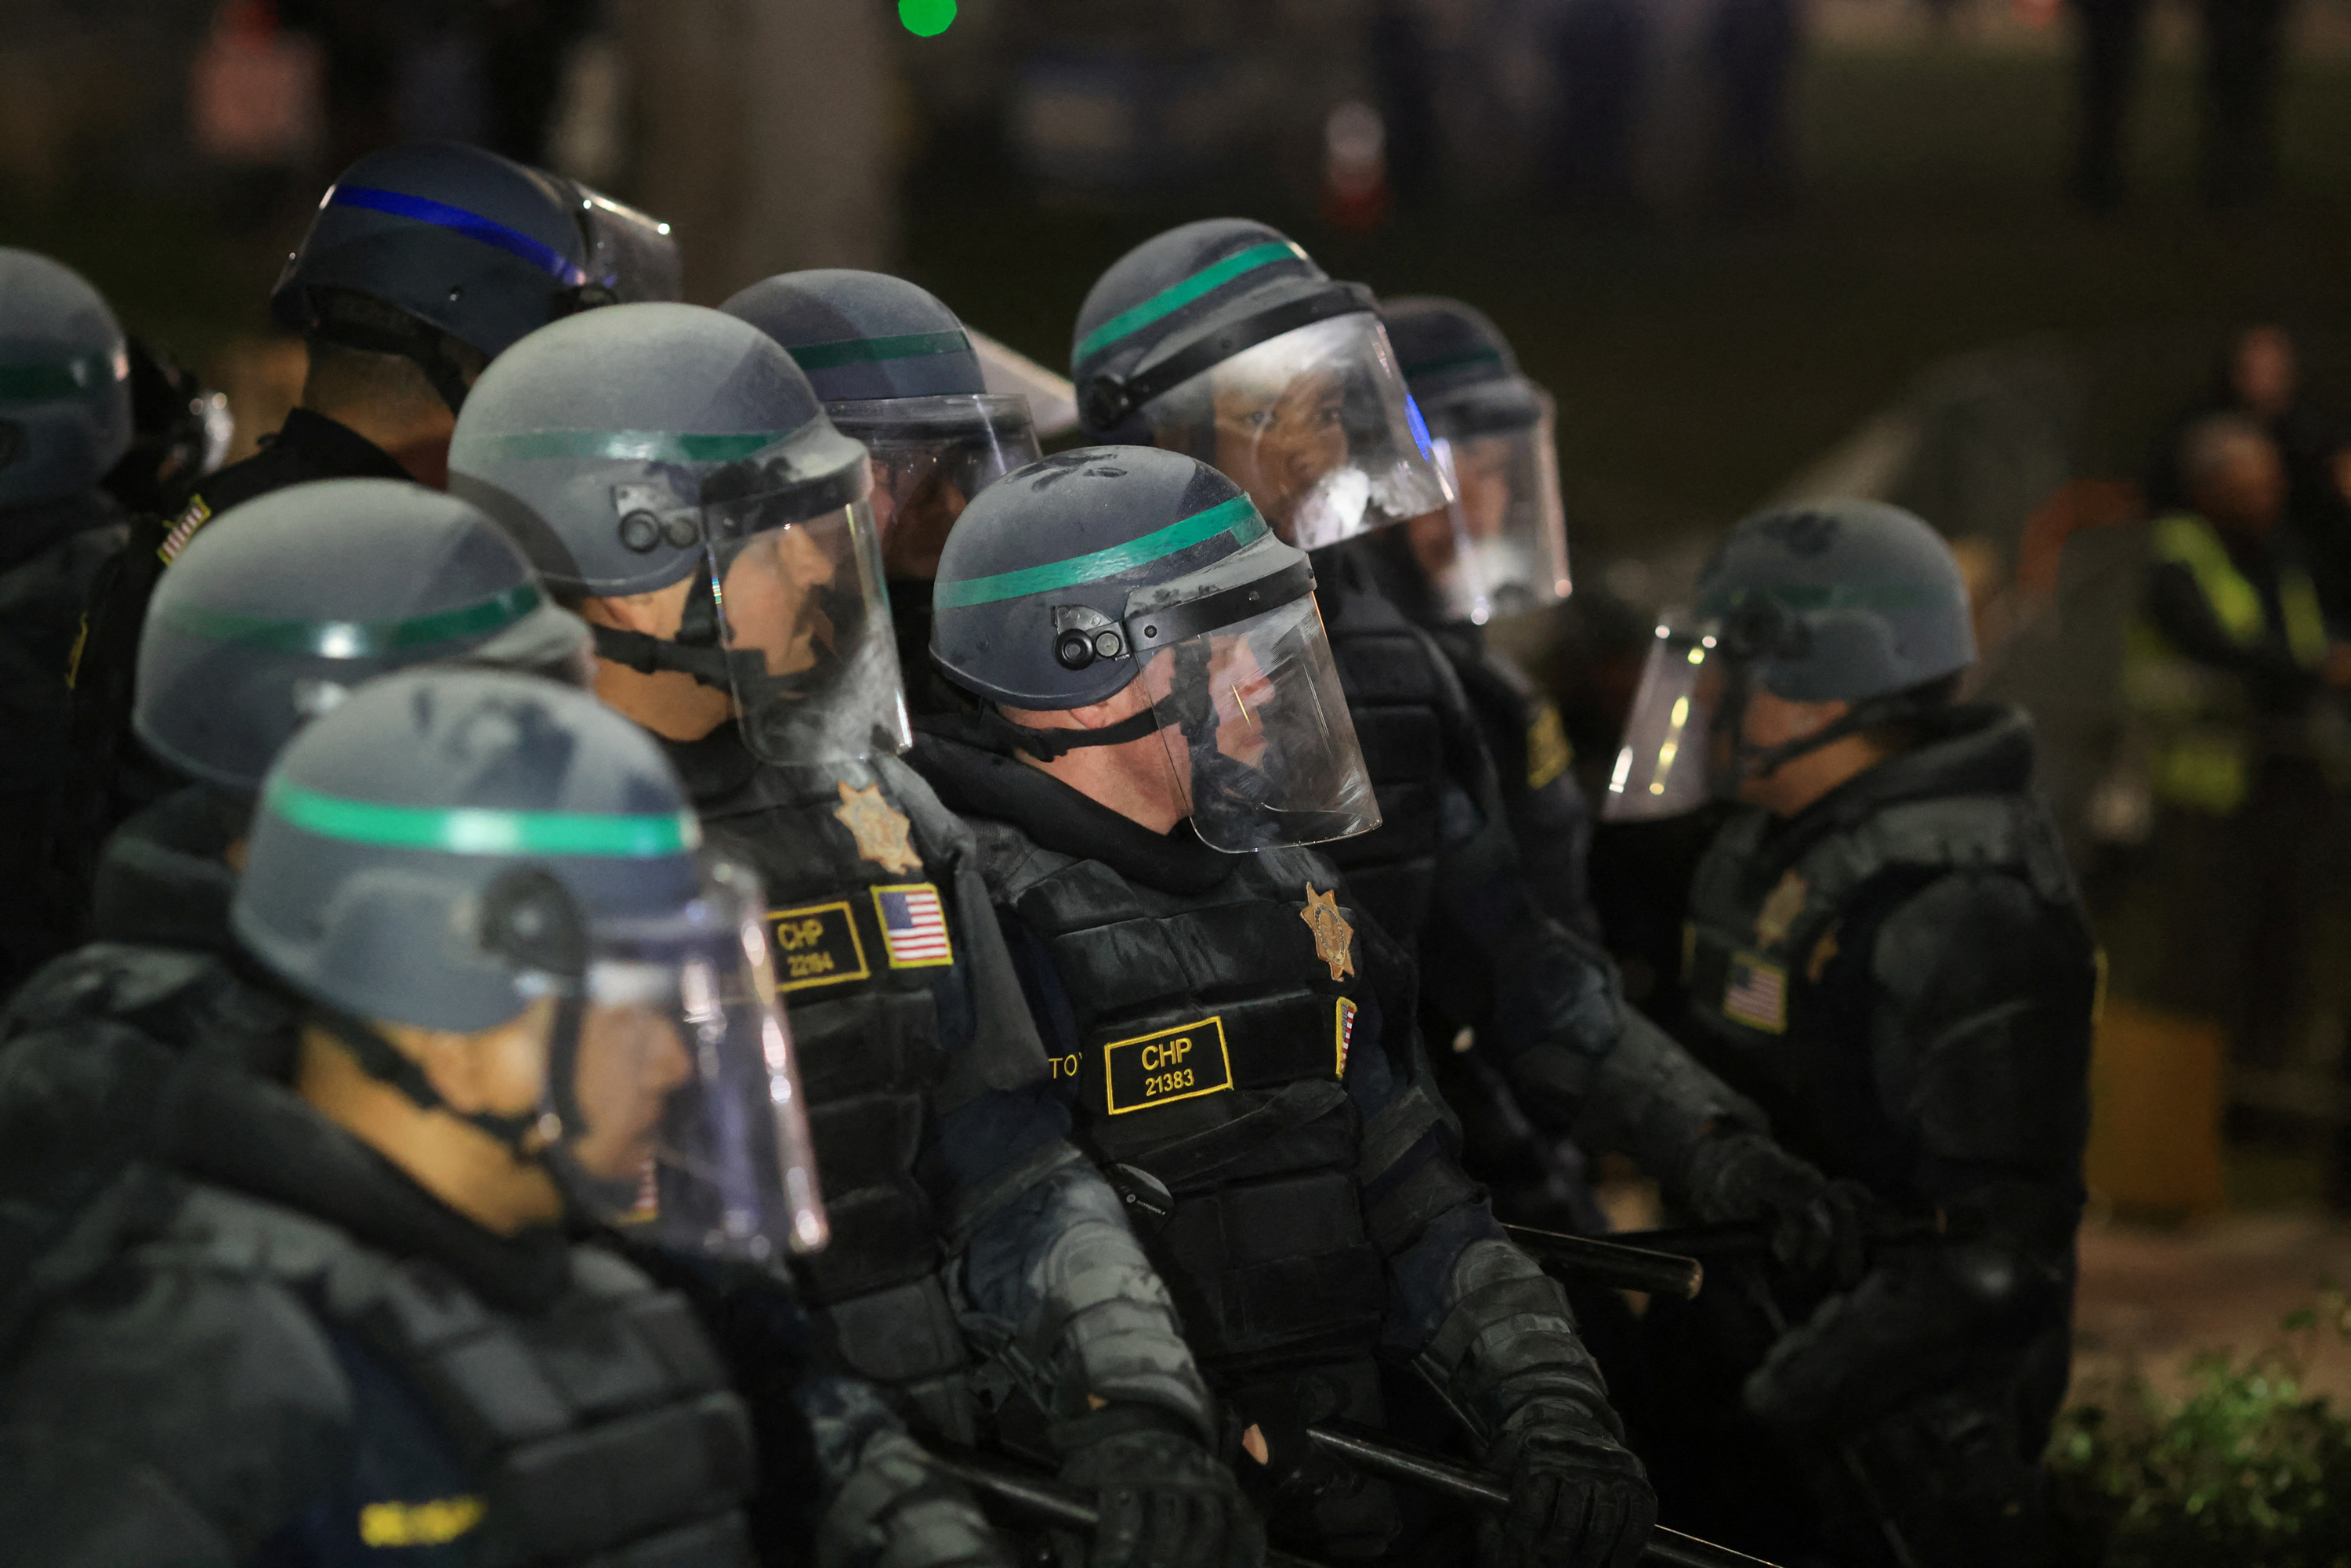 Law enforcement officers stand guard during a protest at UCLA in Los Angeles, California, on May 2.